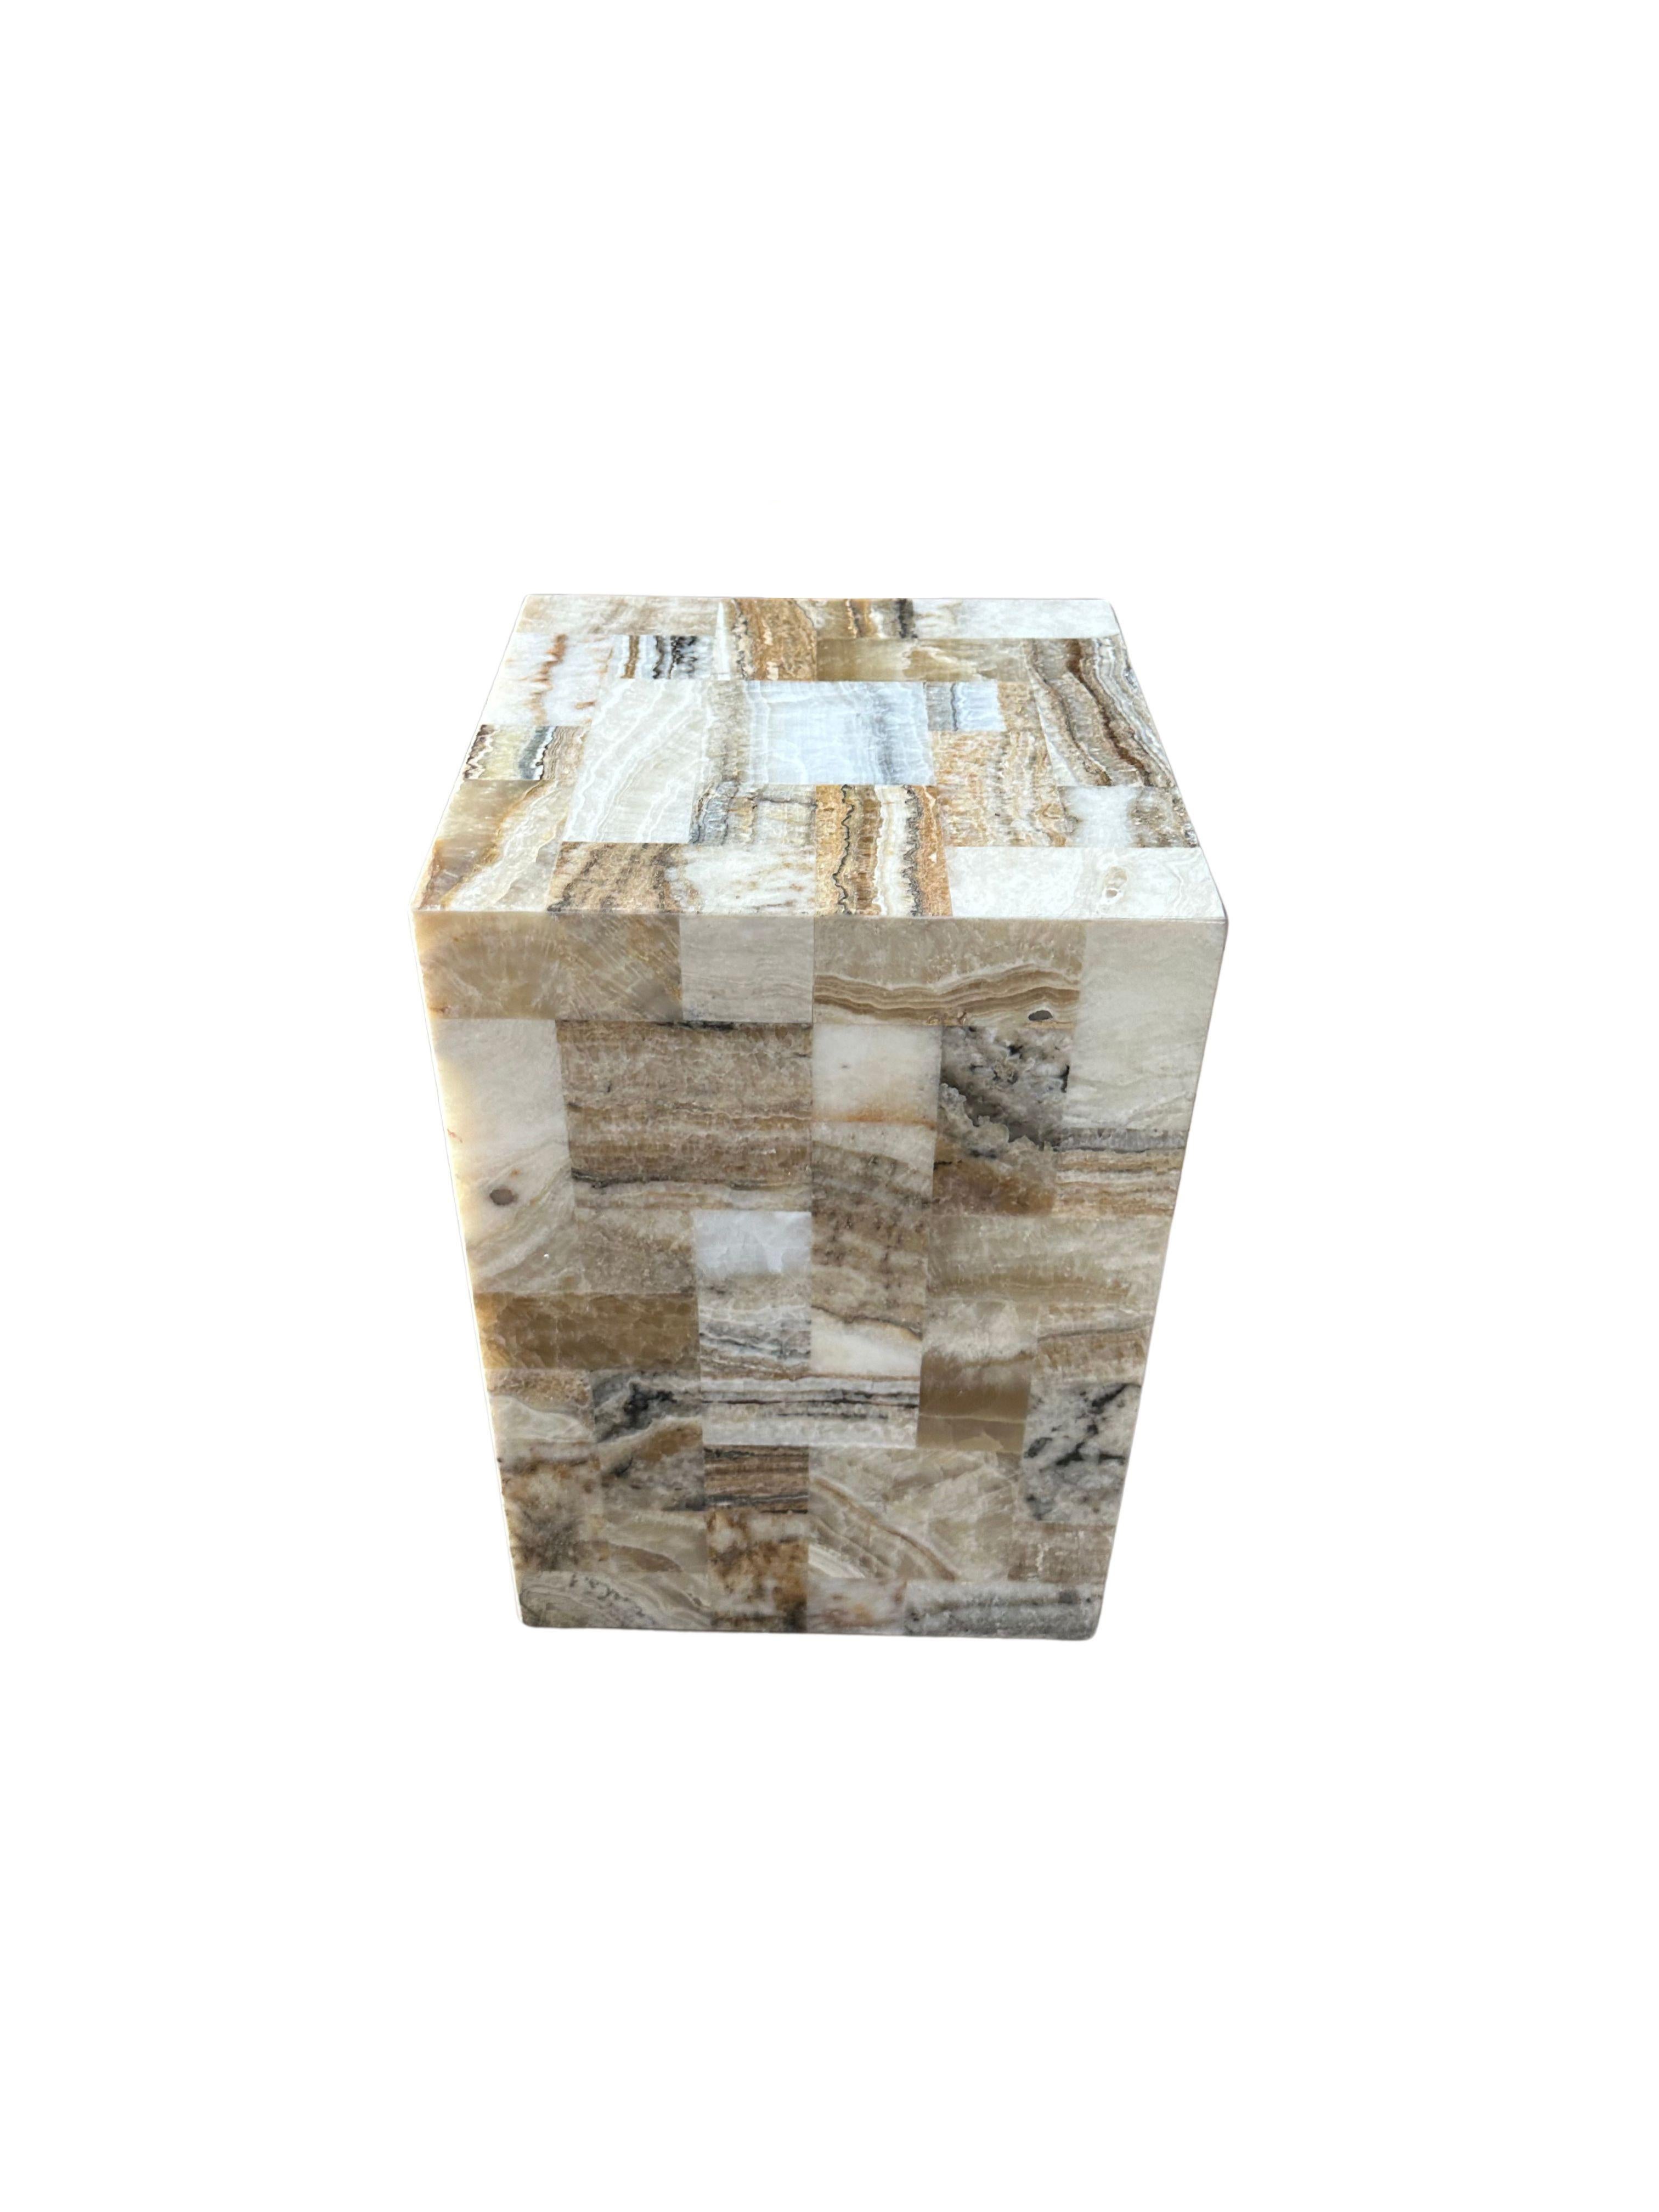 A marble side table or pedestal with wonderful textures and shades. It features a geometric patterning, with smaller marble cut outs that have been molded together. Hand-crafted by local artisans on the island of Java, this is a wonderful object to